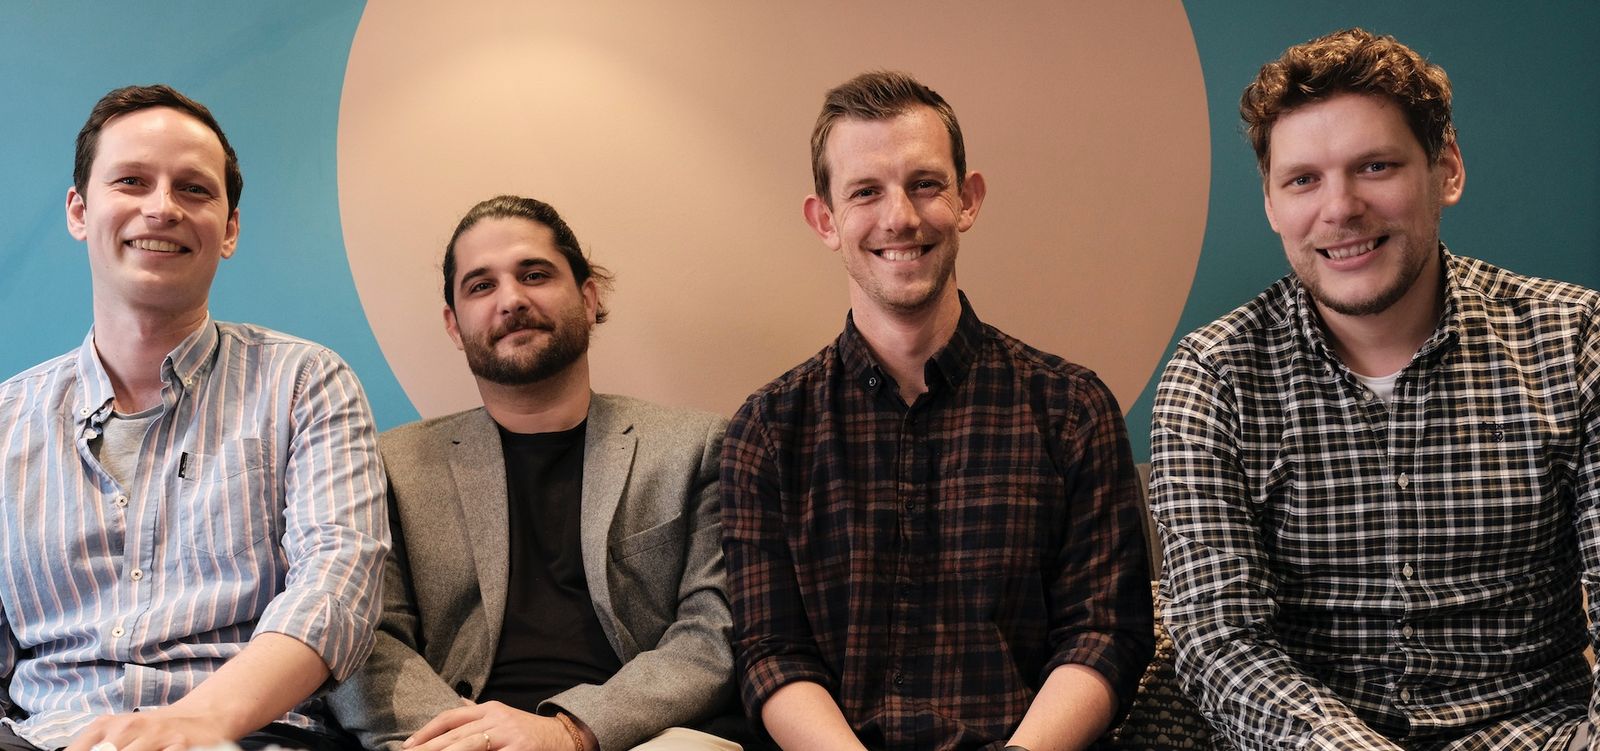 New digital marketing agency, launches in Leeds